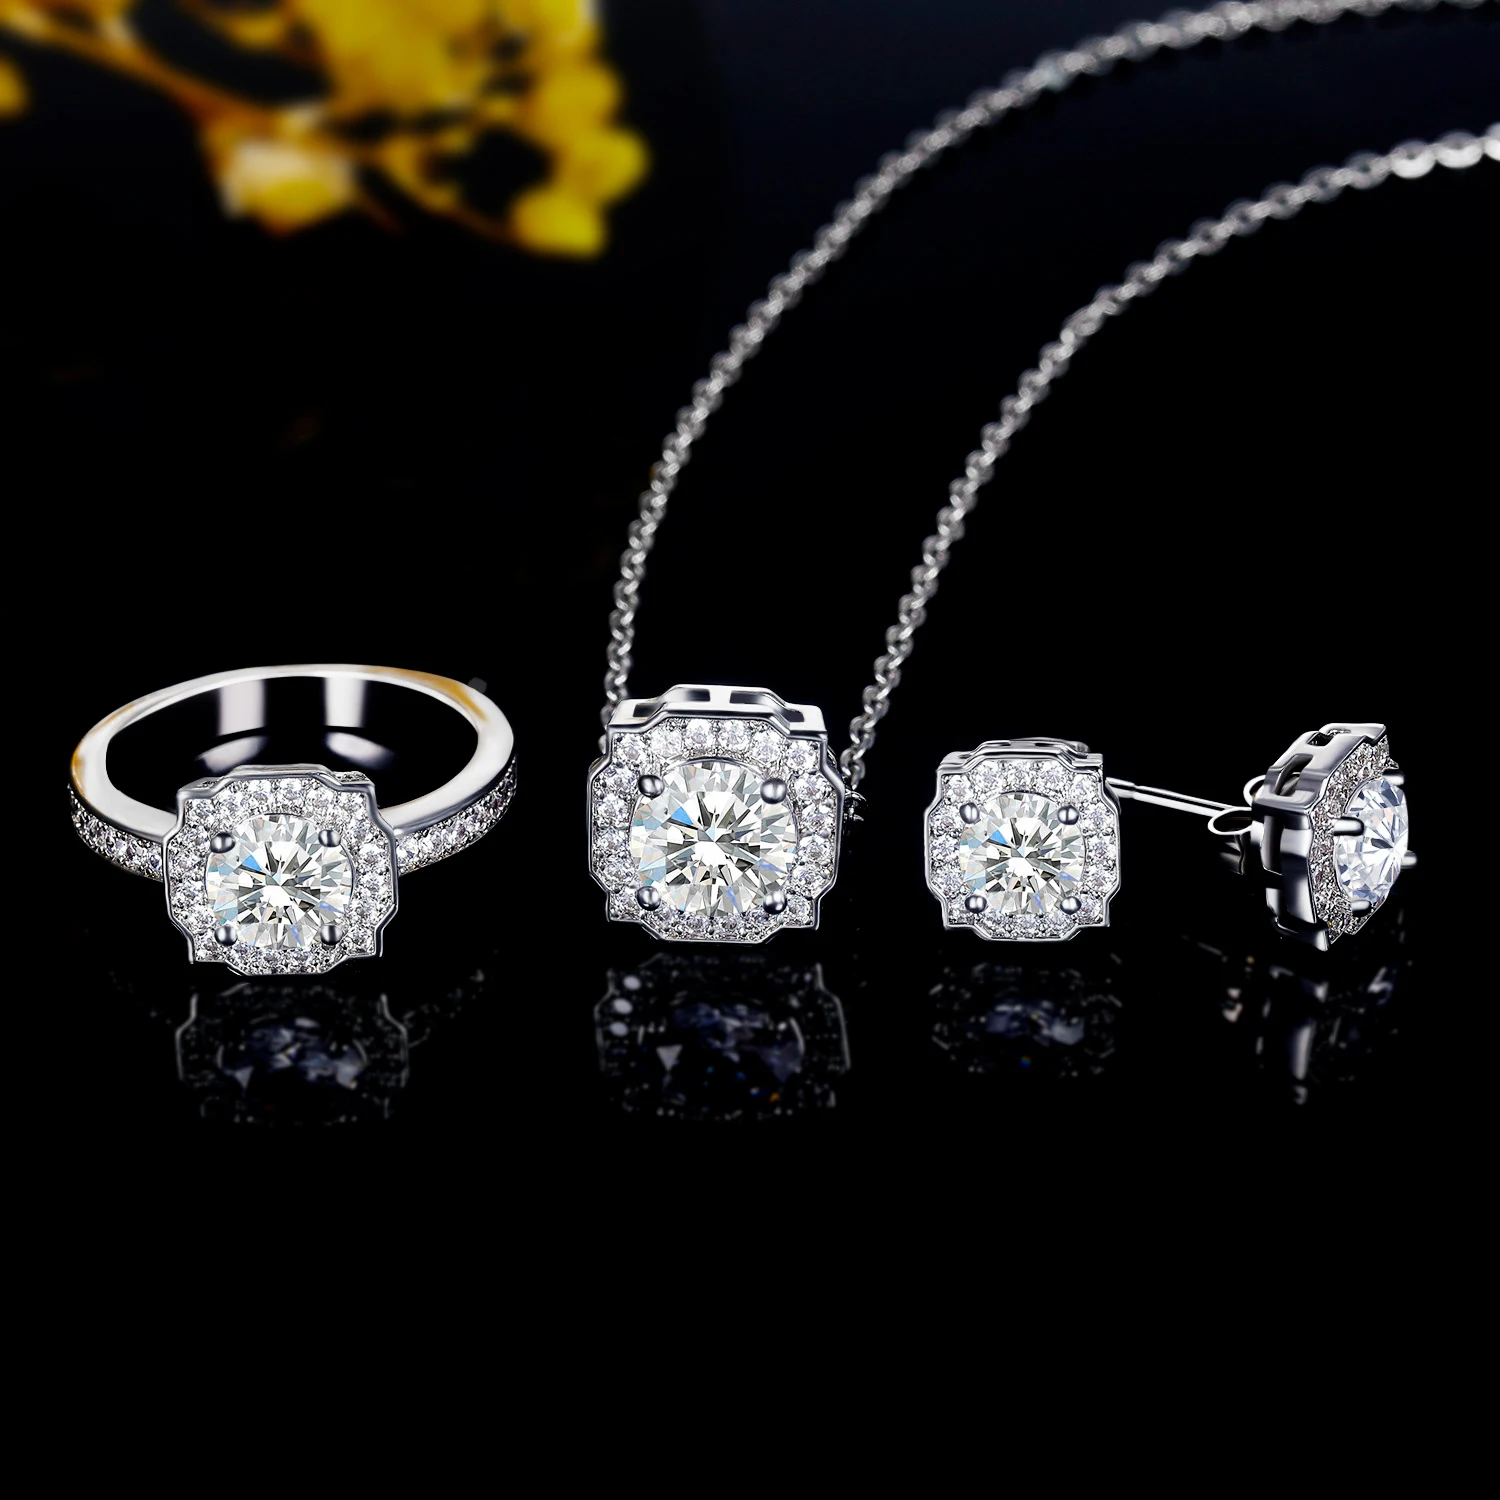 GEMSME Ladies Jewellery Sets Ring Necklace Stud Earrings Cubic Zirconia 18K White Gold Plated Jewellary Set Wedding Gift new fashion necklace design